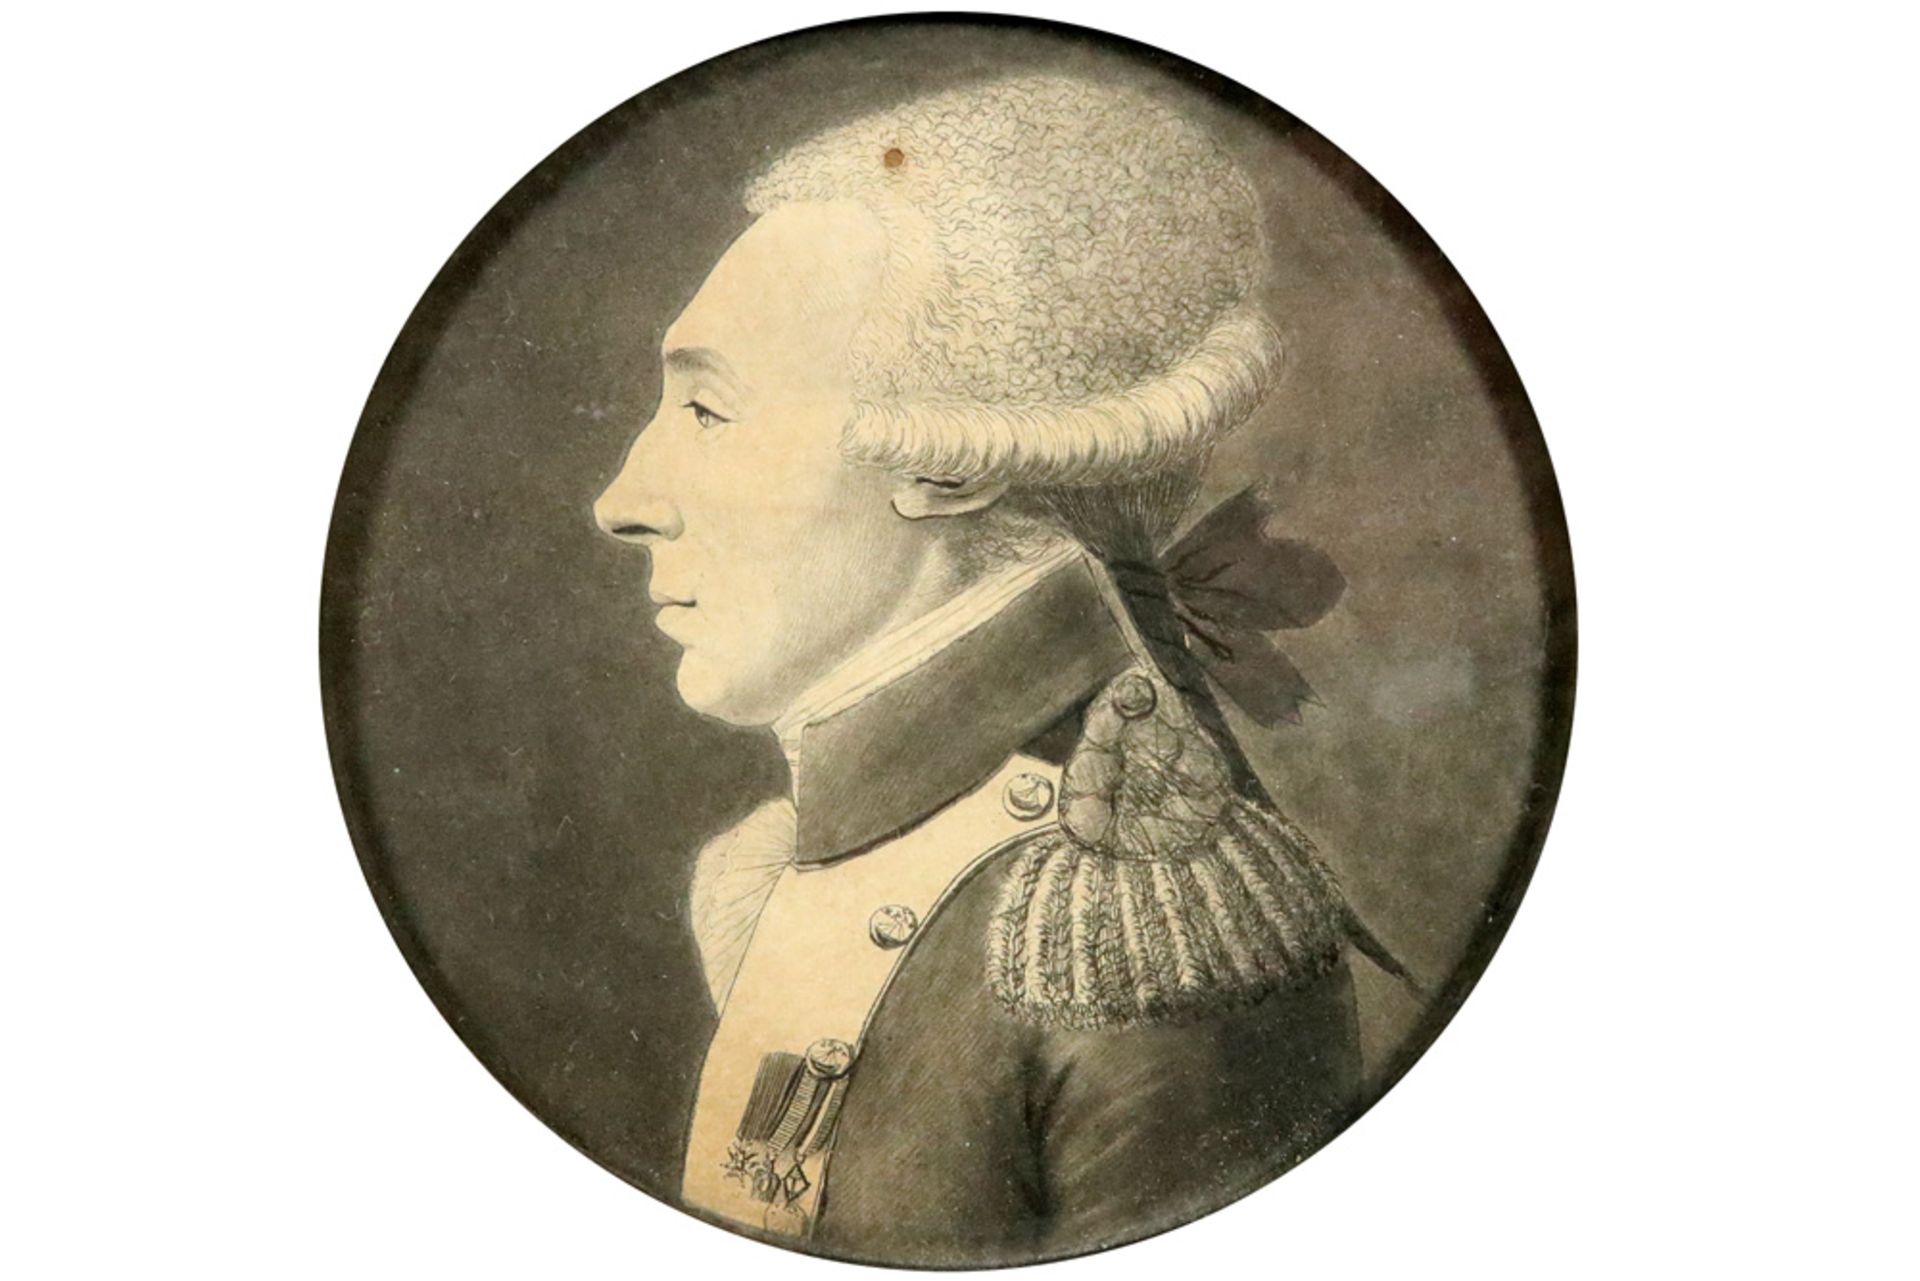 late 18th Cent. miniature portrait of the Marquis de la Fayette in ink - attributed to Edmé des